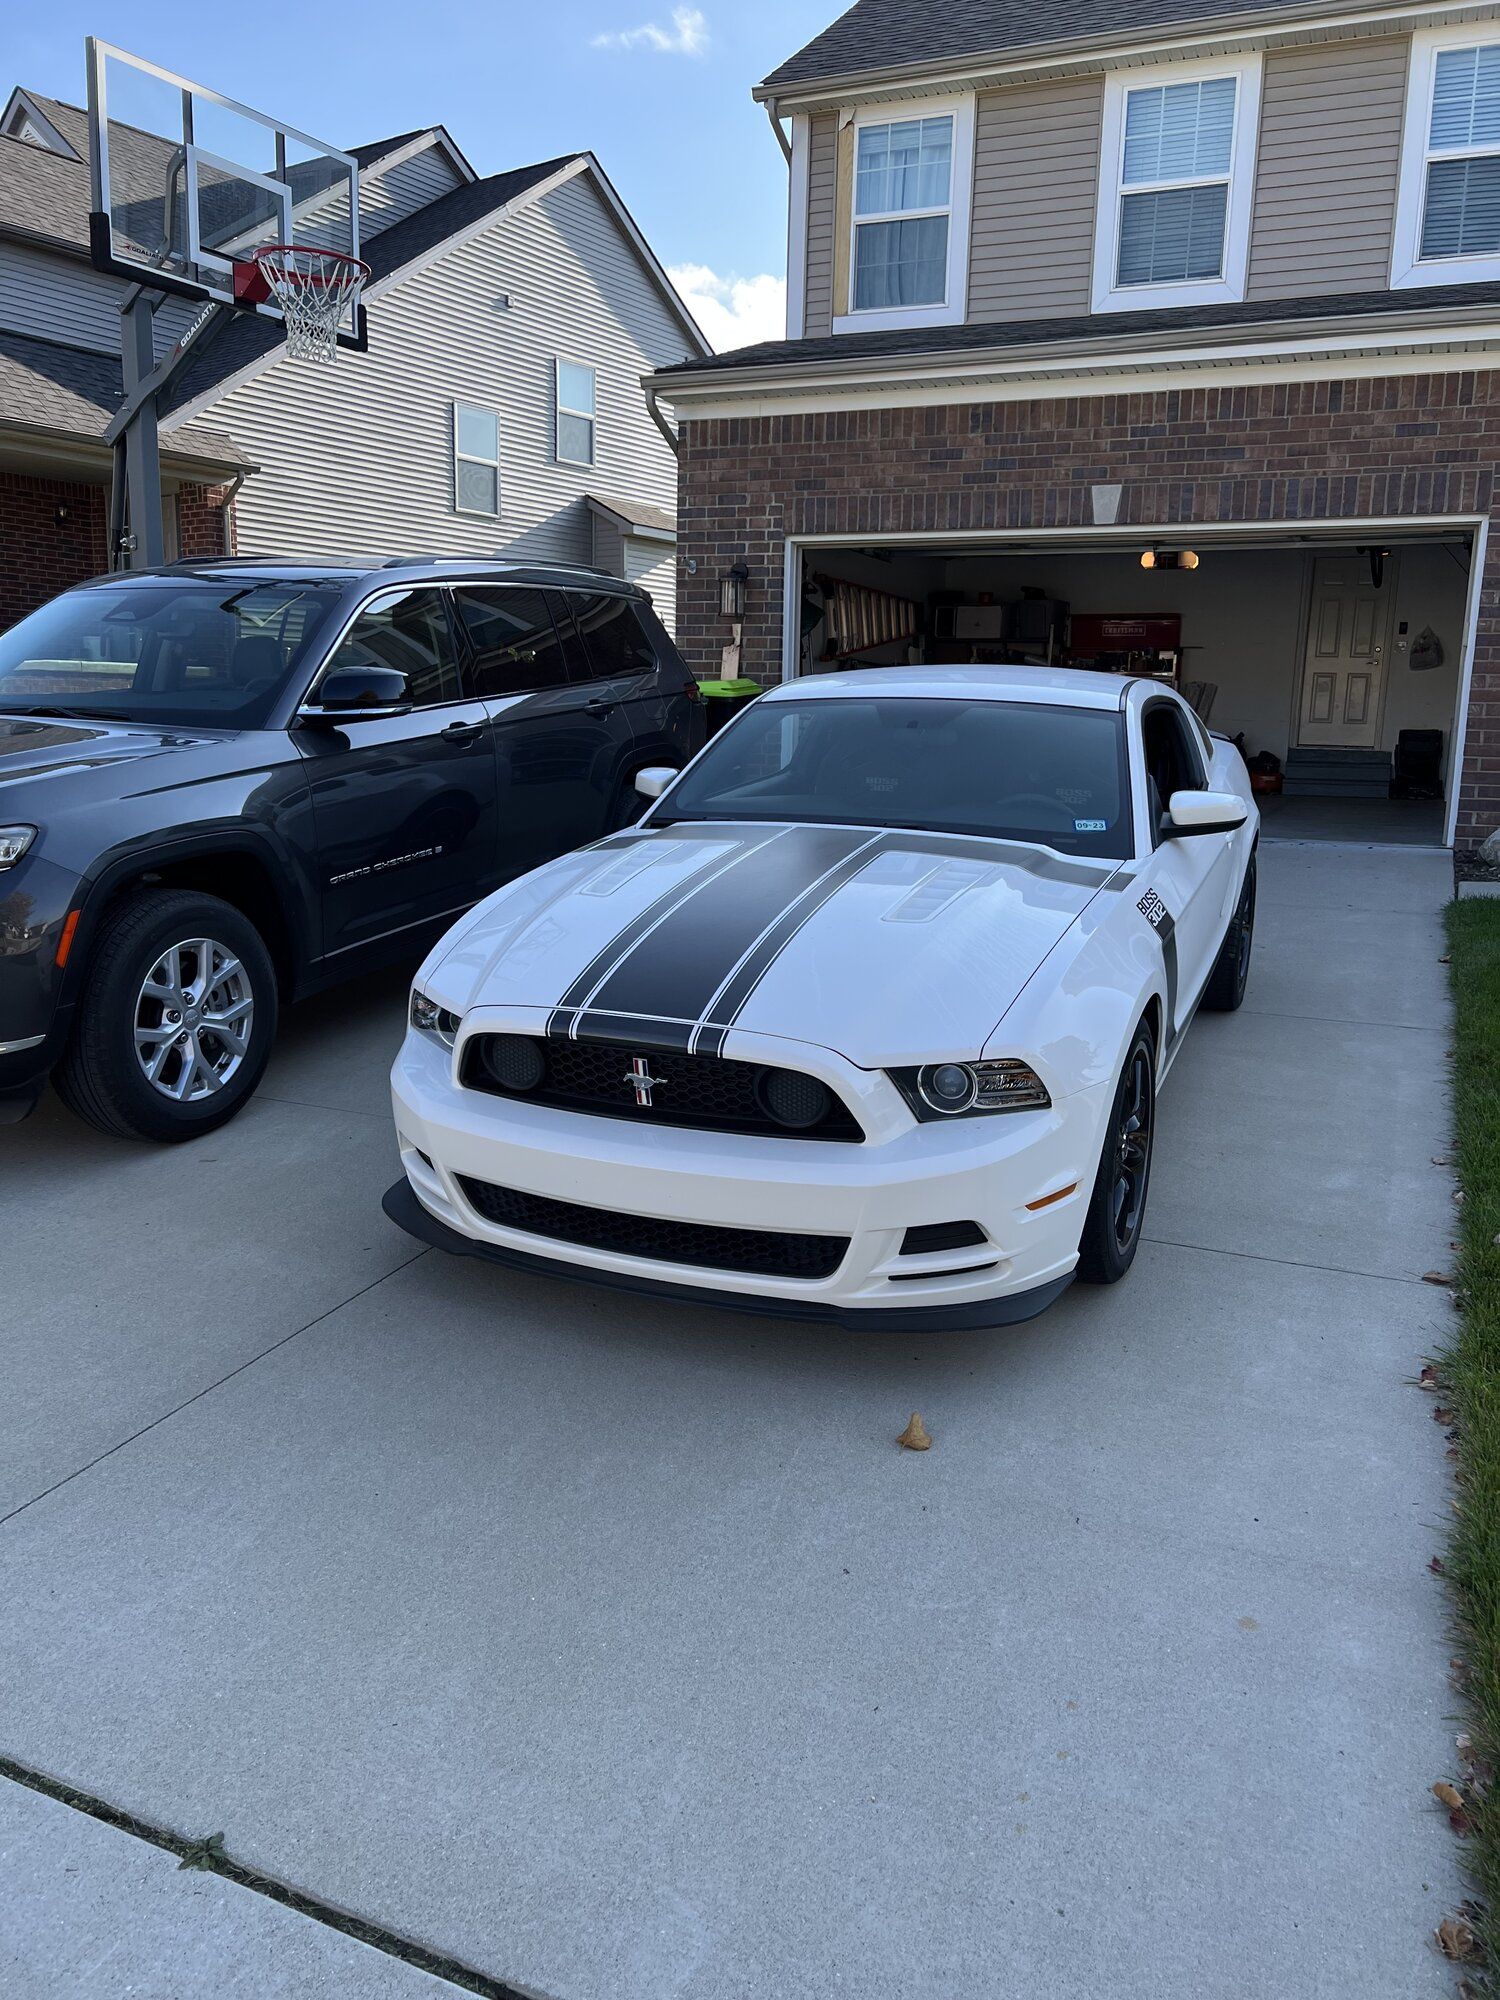 2013 Mustang
Boss_302  (Dad’s toy)